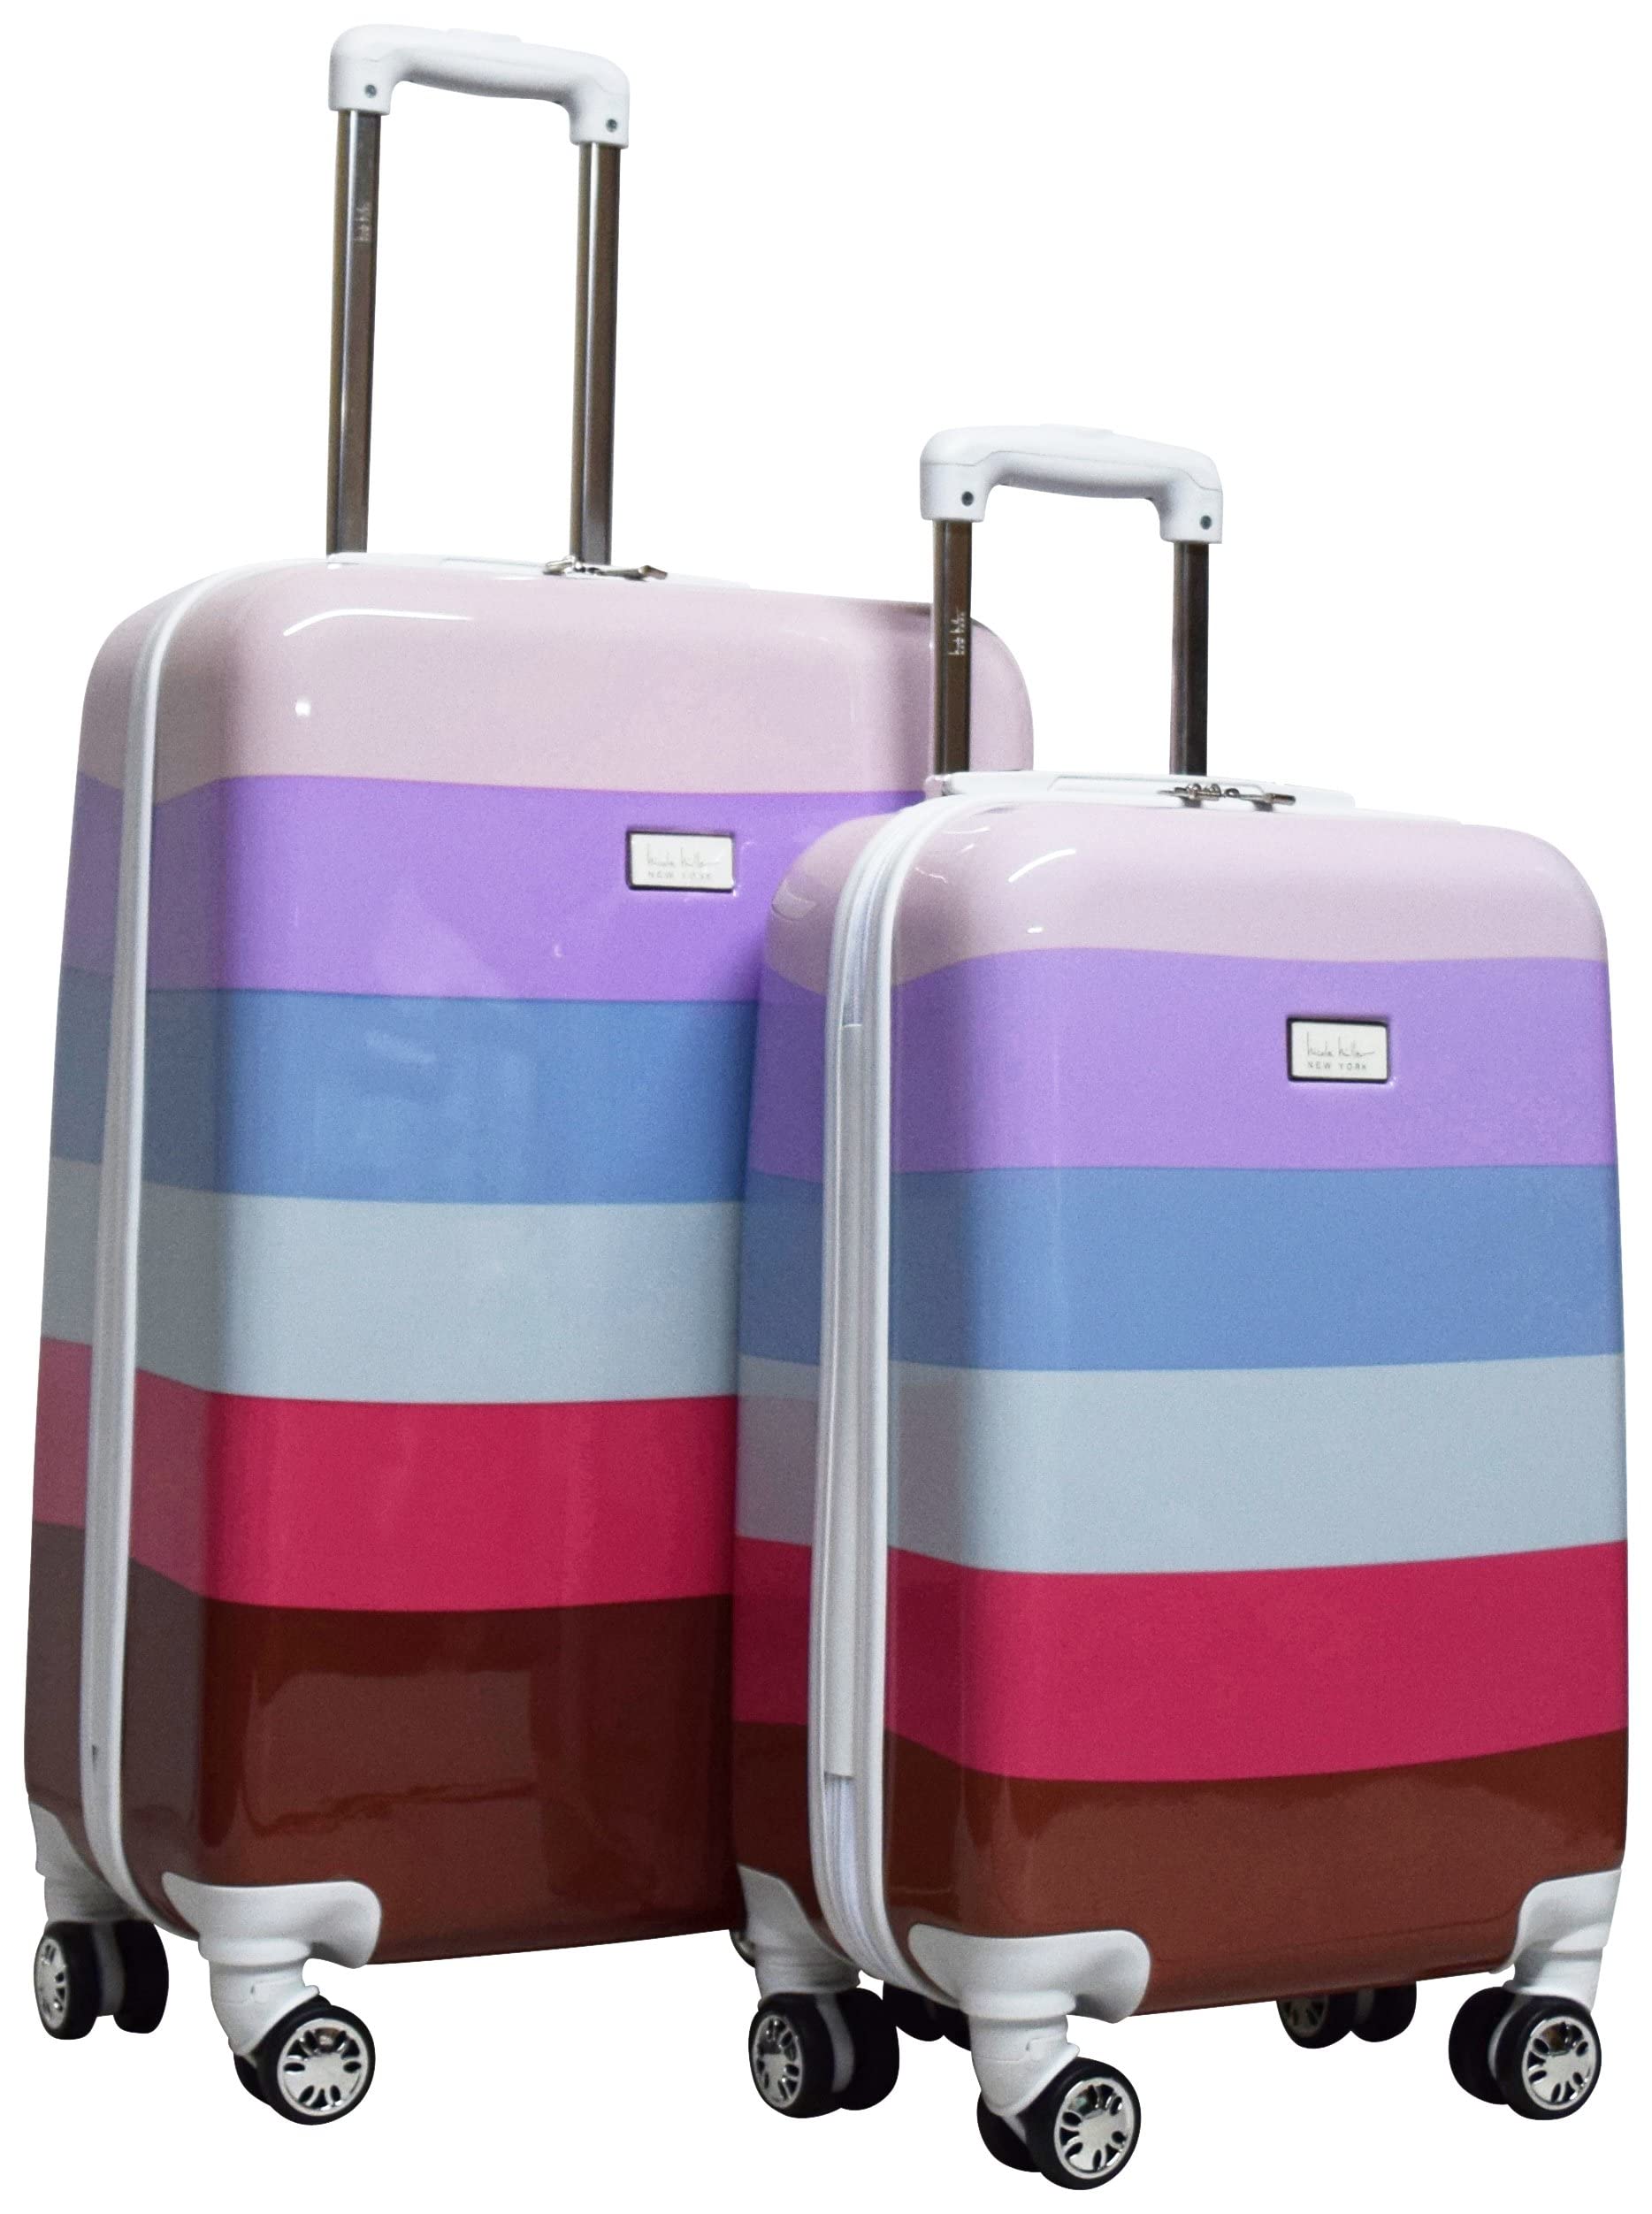 Nicole Miller Luggage Rainbow collection - 2 Piece Hardside Lightweight Spinner Suitcase Set - Travel Set includes 20-Inch carry